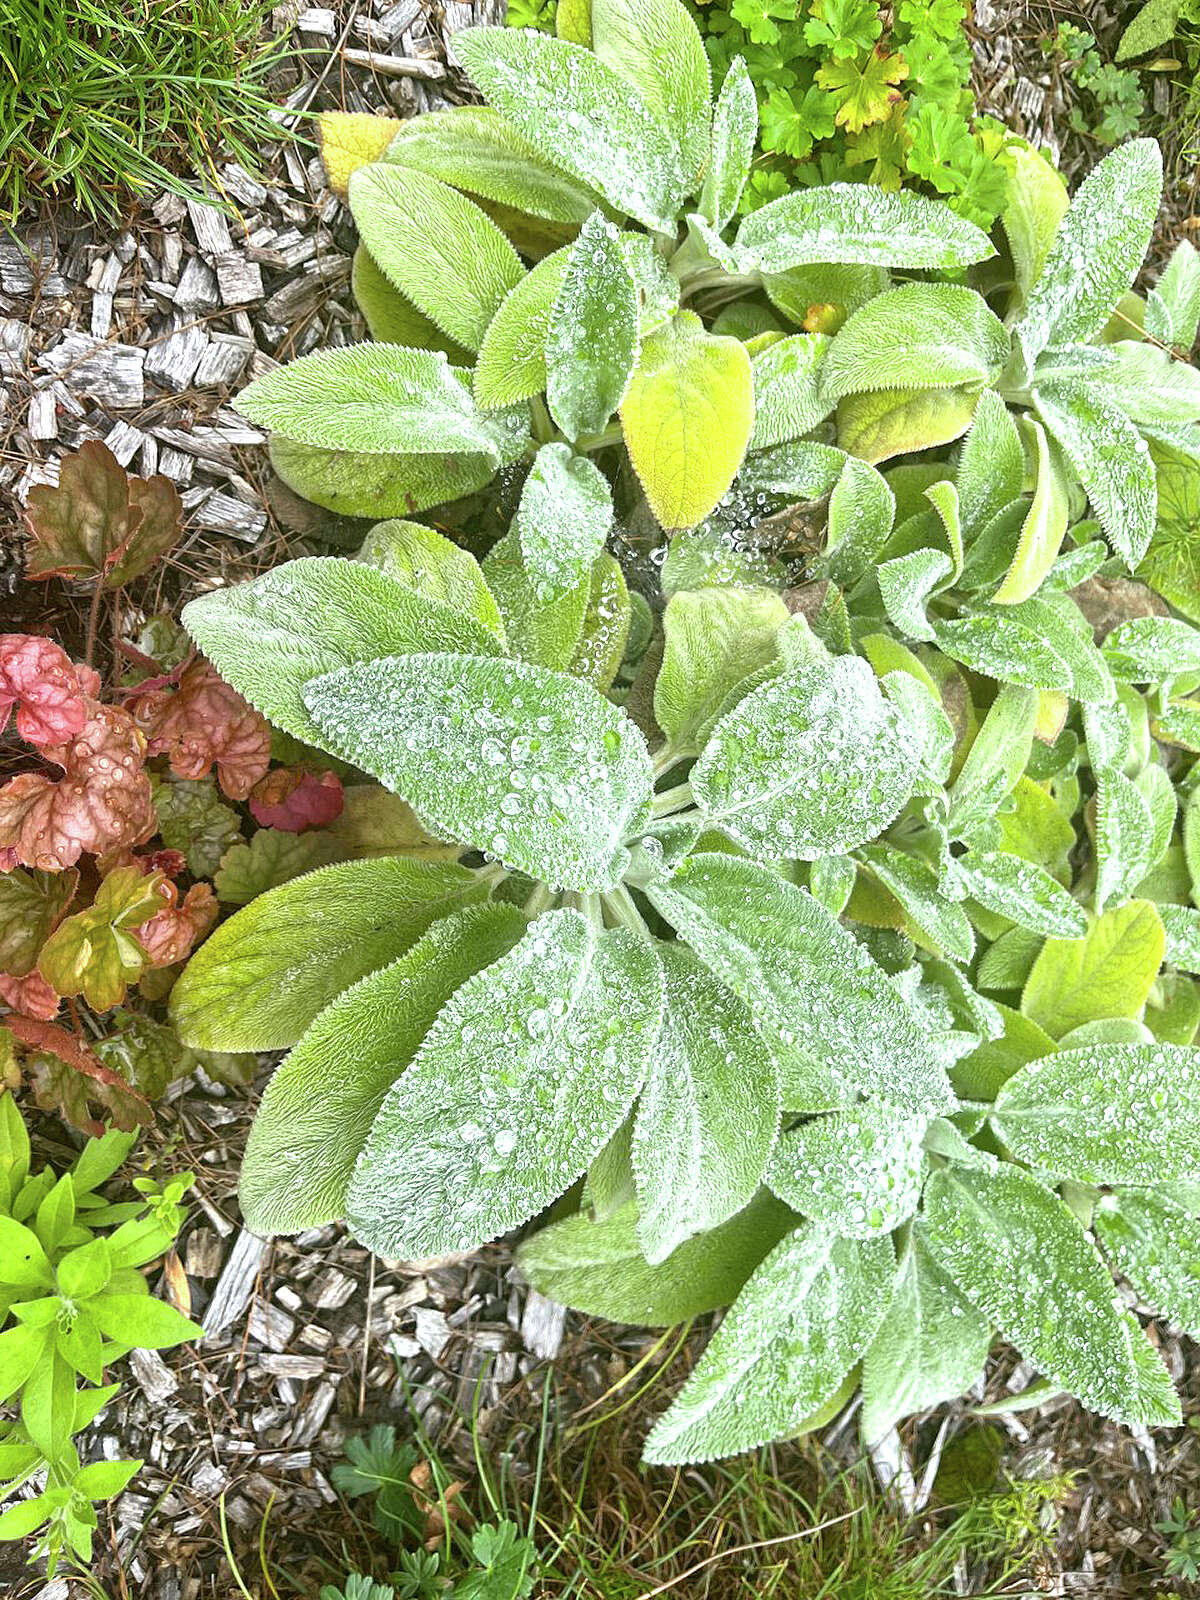 Drops of water linger on the leaves of lamb's ear plants after a rain.